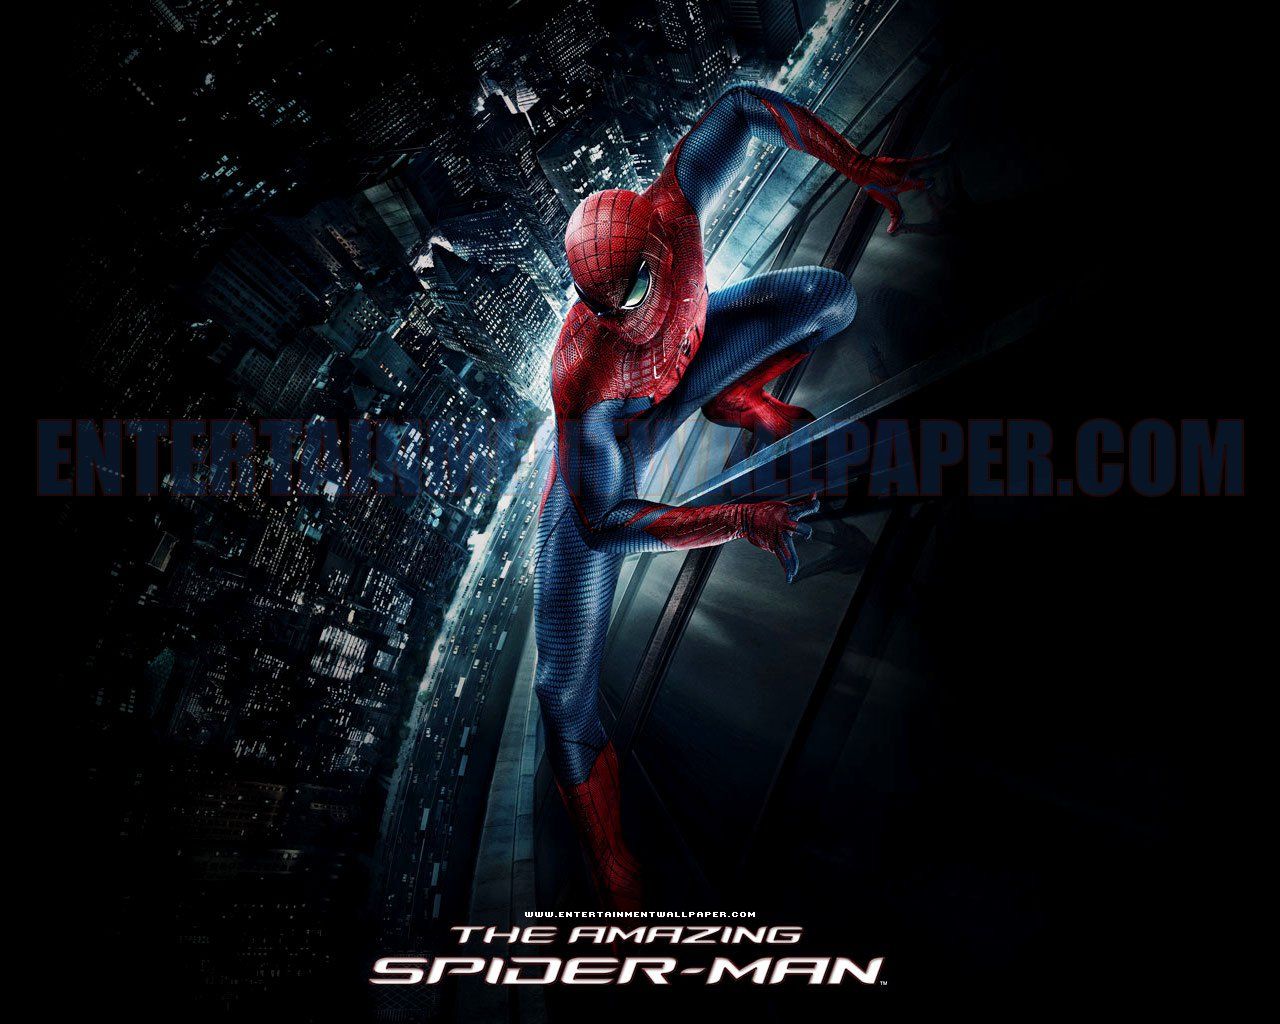 The Amazing Spider-Man [2012] - Upcoming Movies Wallpaper ...